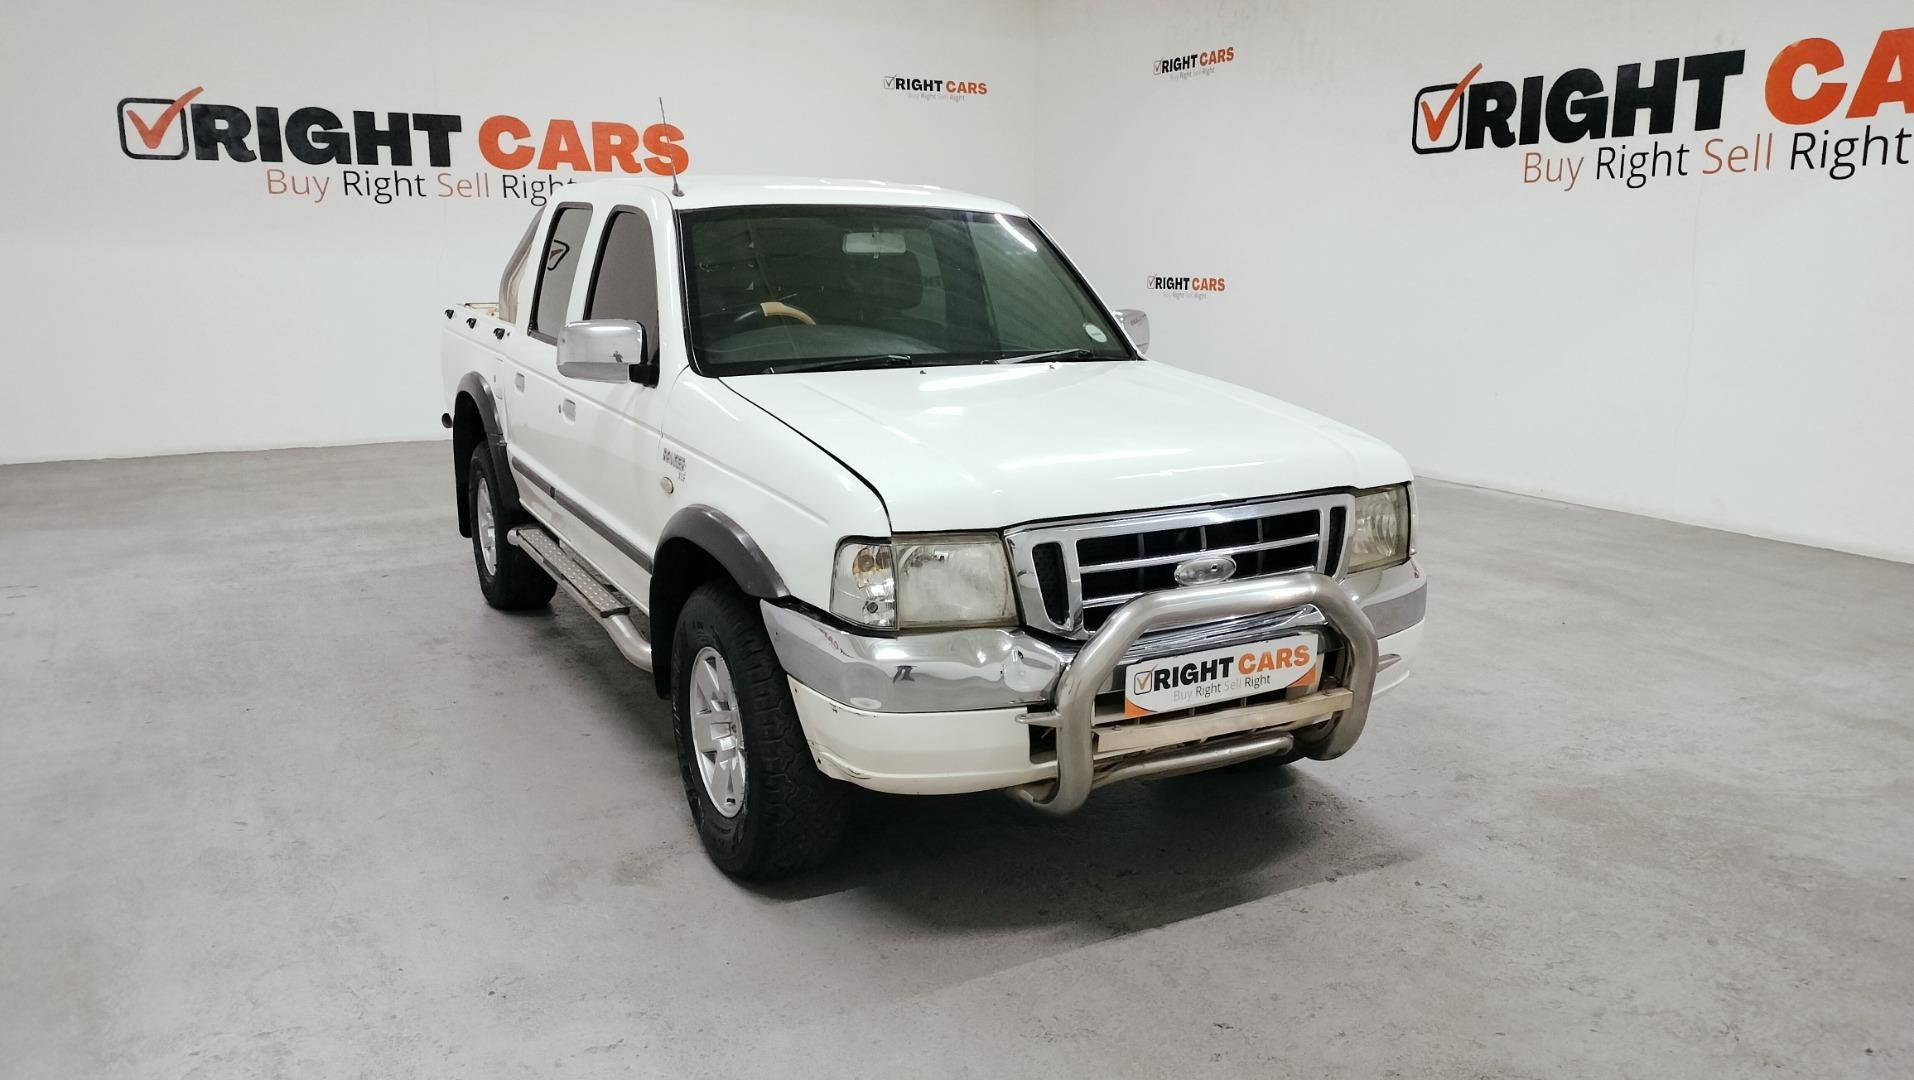 2006 Ford Ranger 4000 V6 Double Cab XLE For Sale